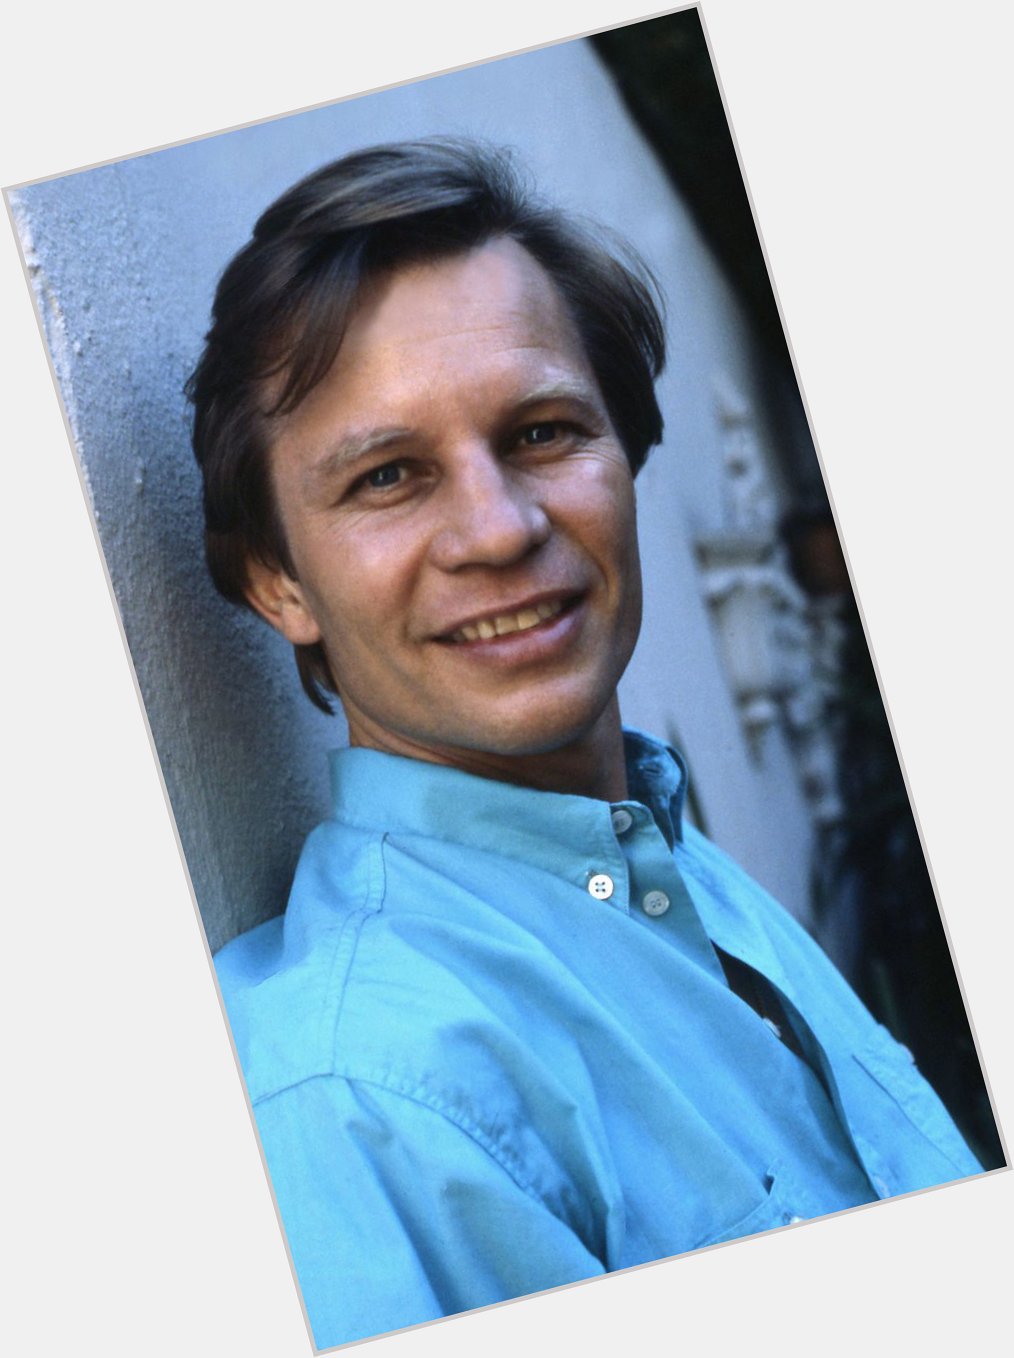 Happy Birthday to Michael York who turns 78 today! 